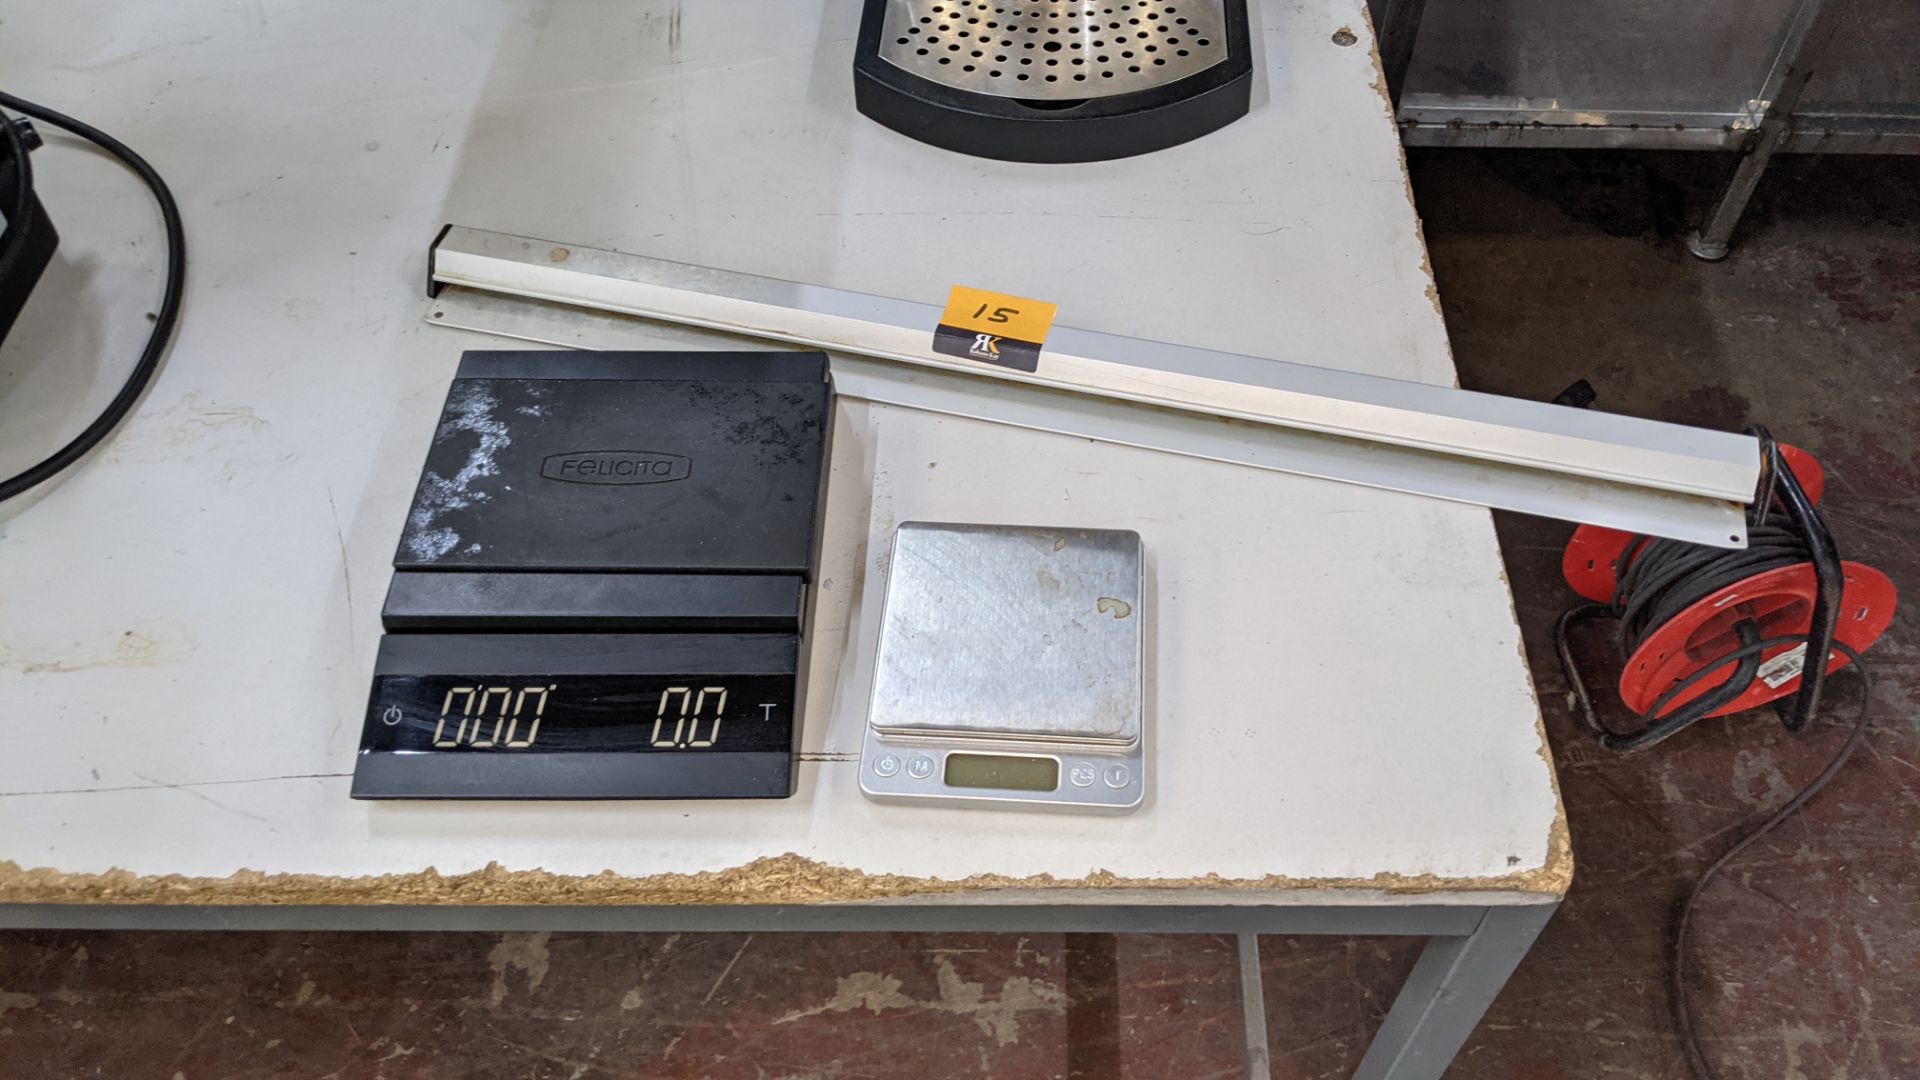 Mixed lot comprising Felicita Parallel model weighing scales, mini weighing scales & wall-mountable